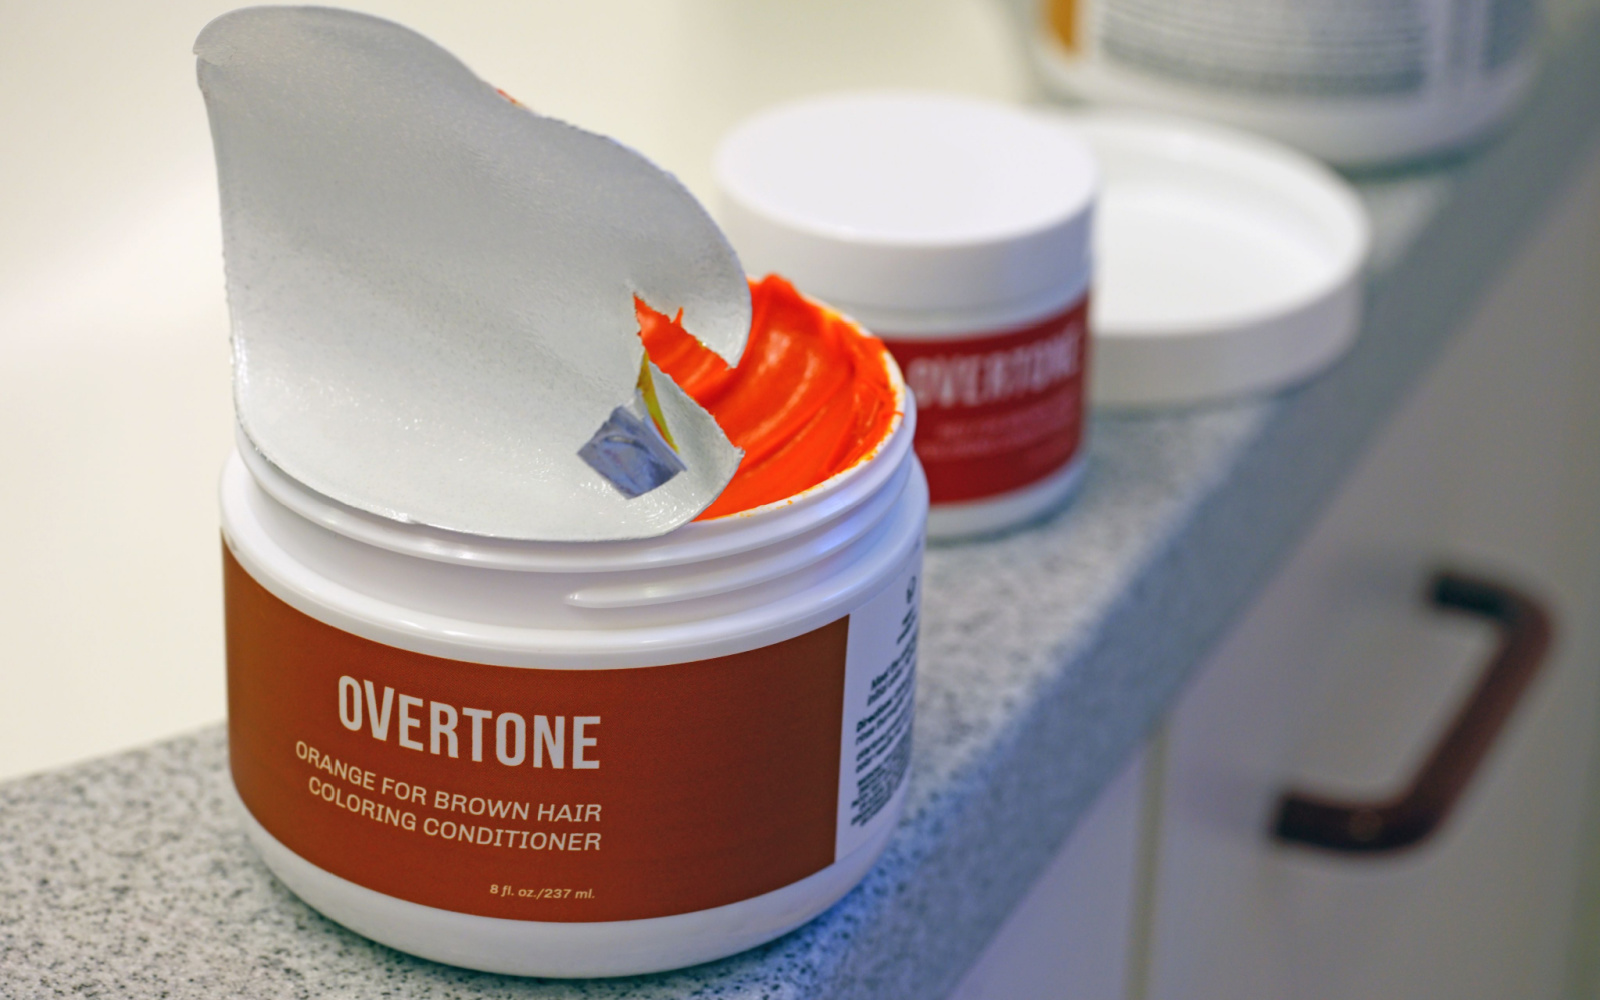 Does oVertone Cover Gray Hair? | A Complete Guide